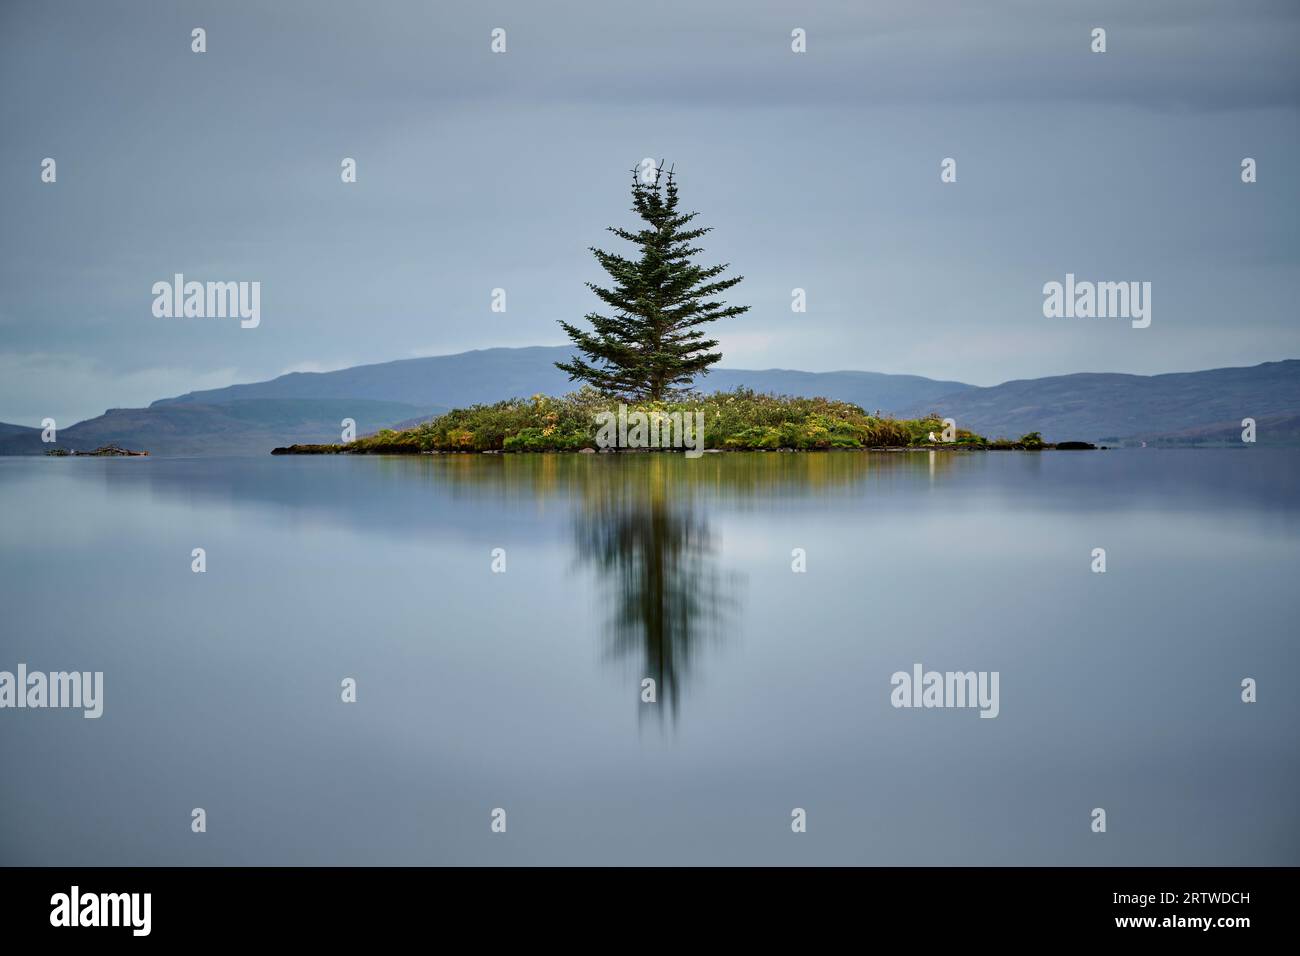 Spruce on island in lake against mountains Stock Photo